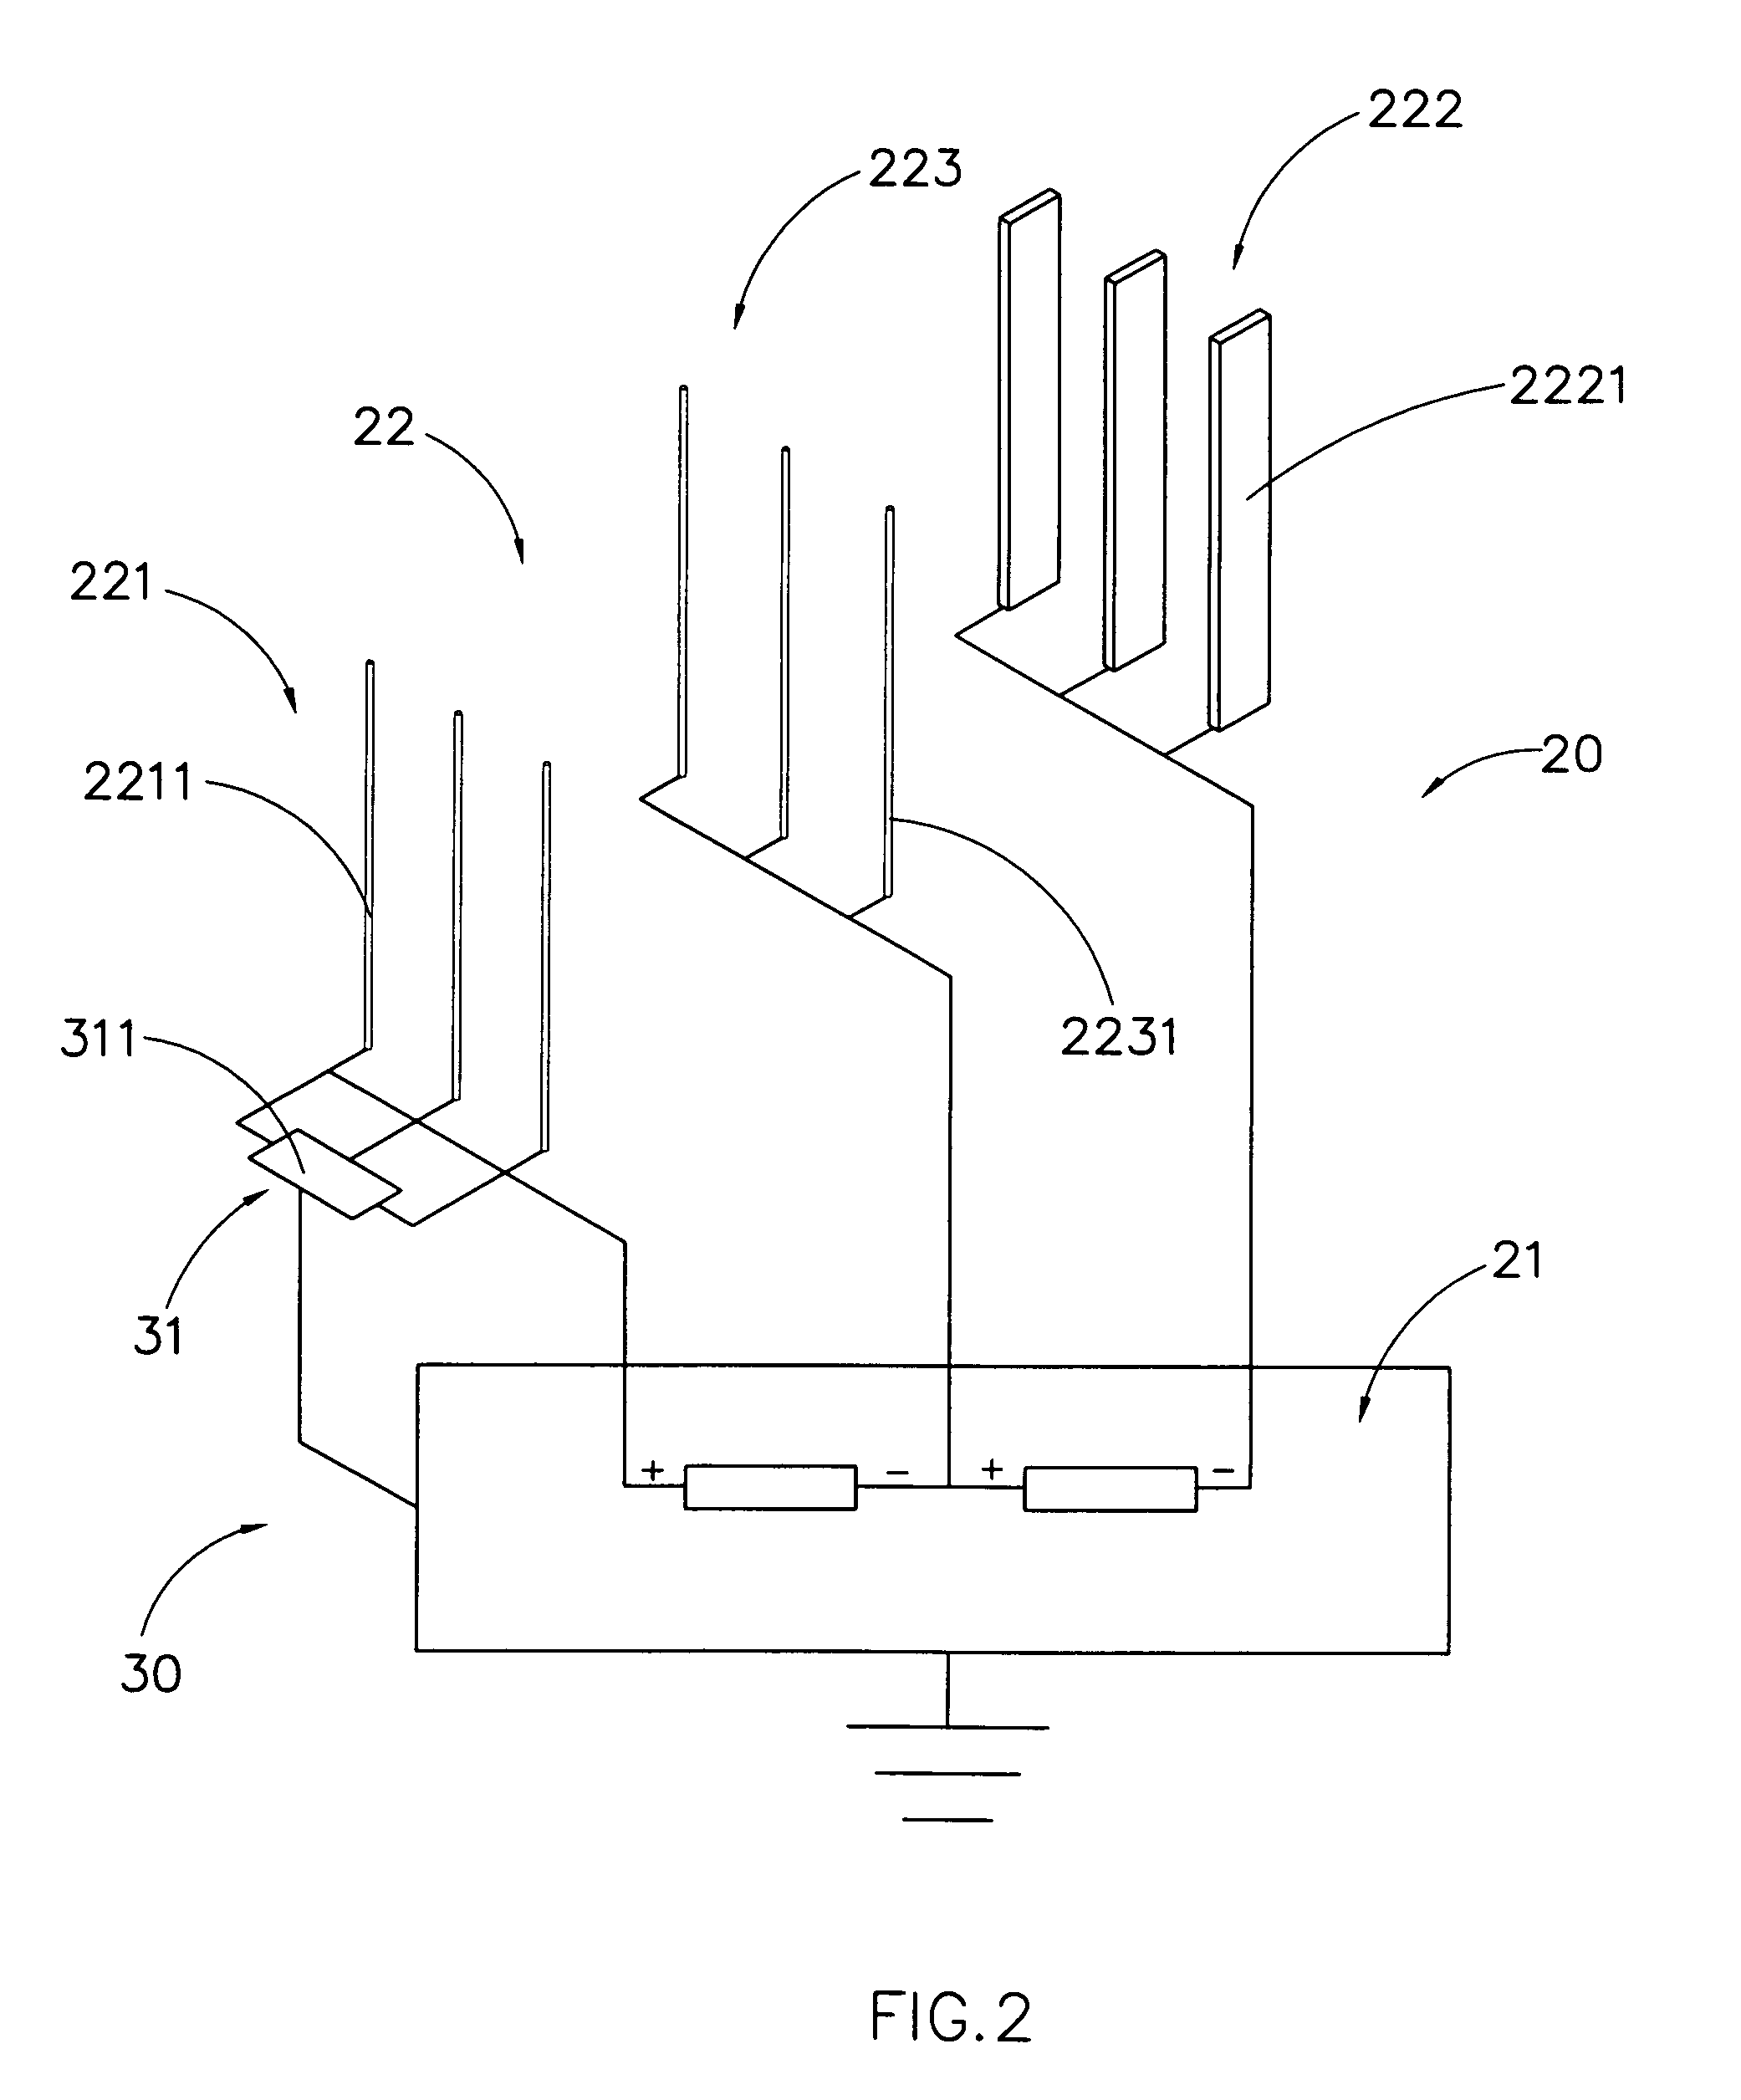 Air purifier with Ozone reduction arrangement